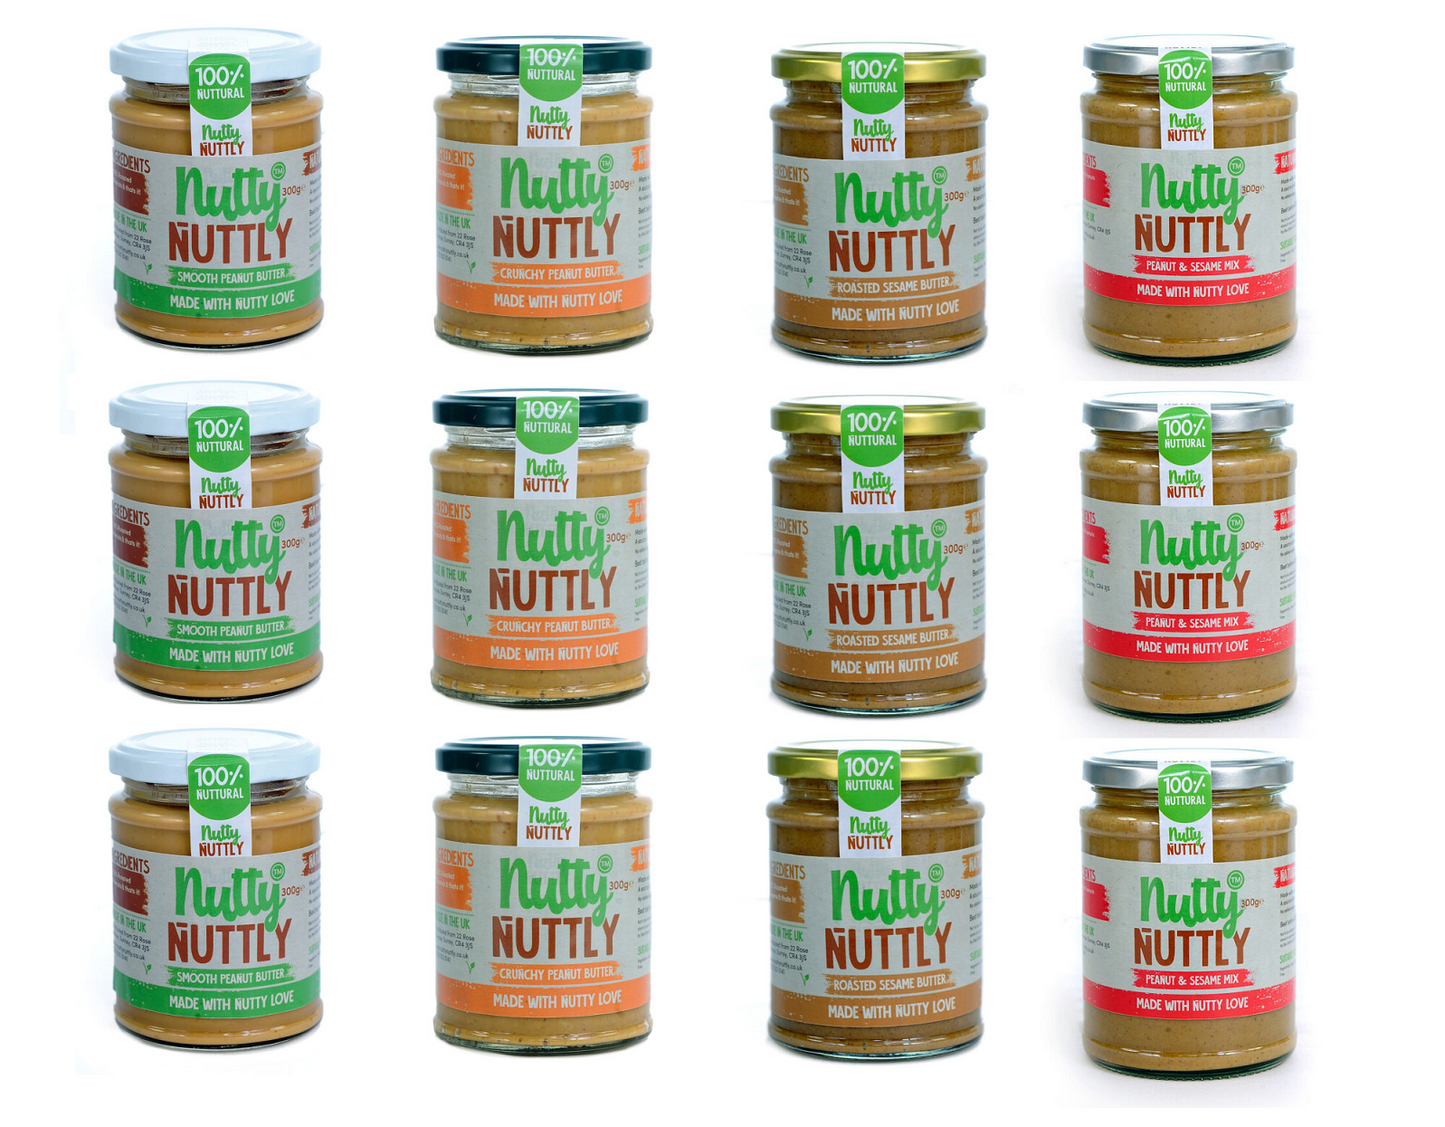 Pack of 12 Nut Butters, 300g jars of differing types.  3 jars from each type - Smooth Peanut, Sesame, Crunch Peanut and Mix of Peanut and Sesame.